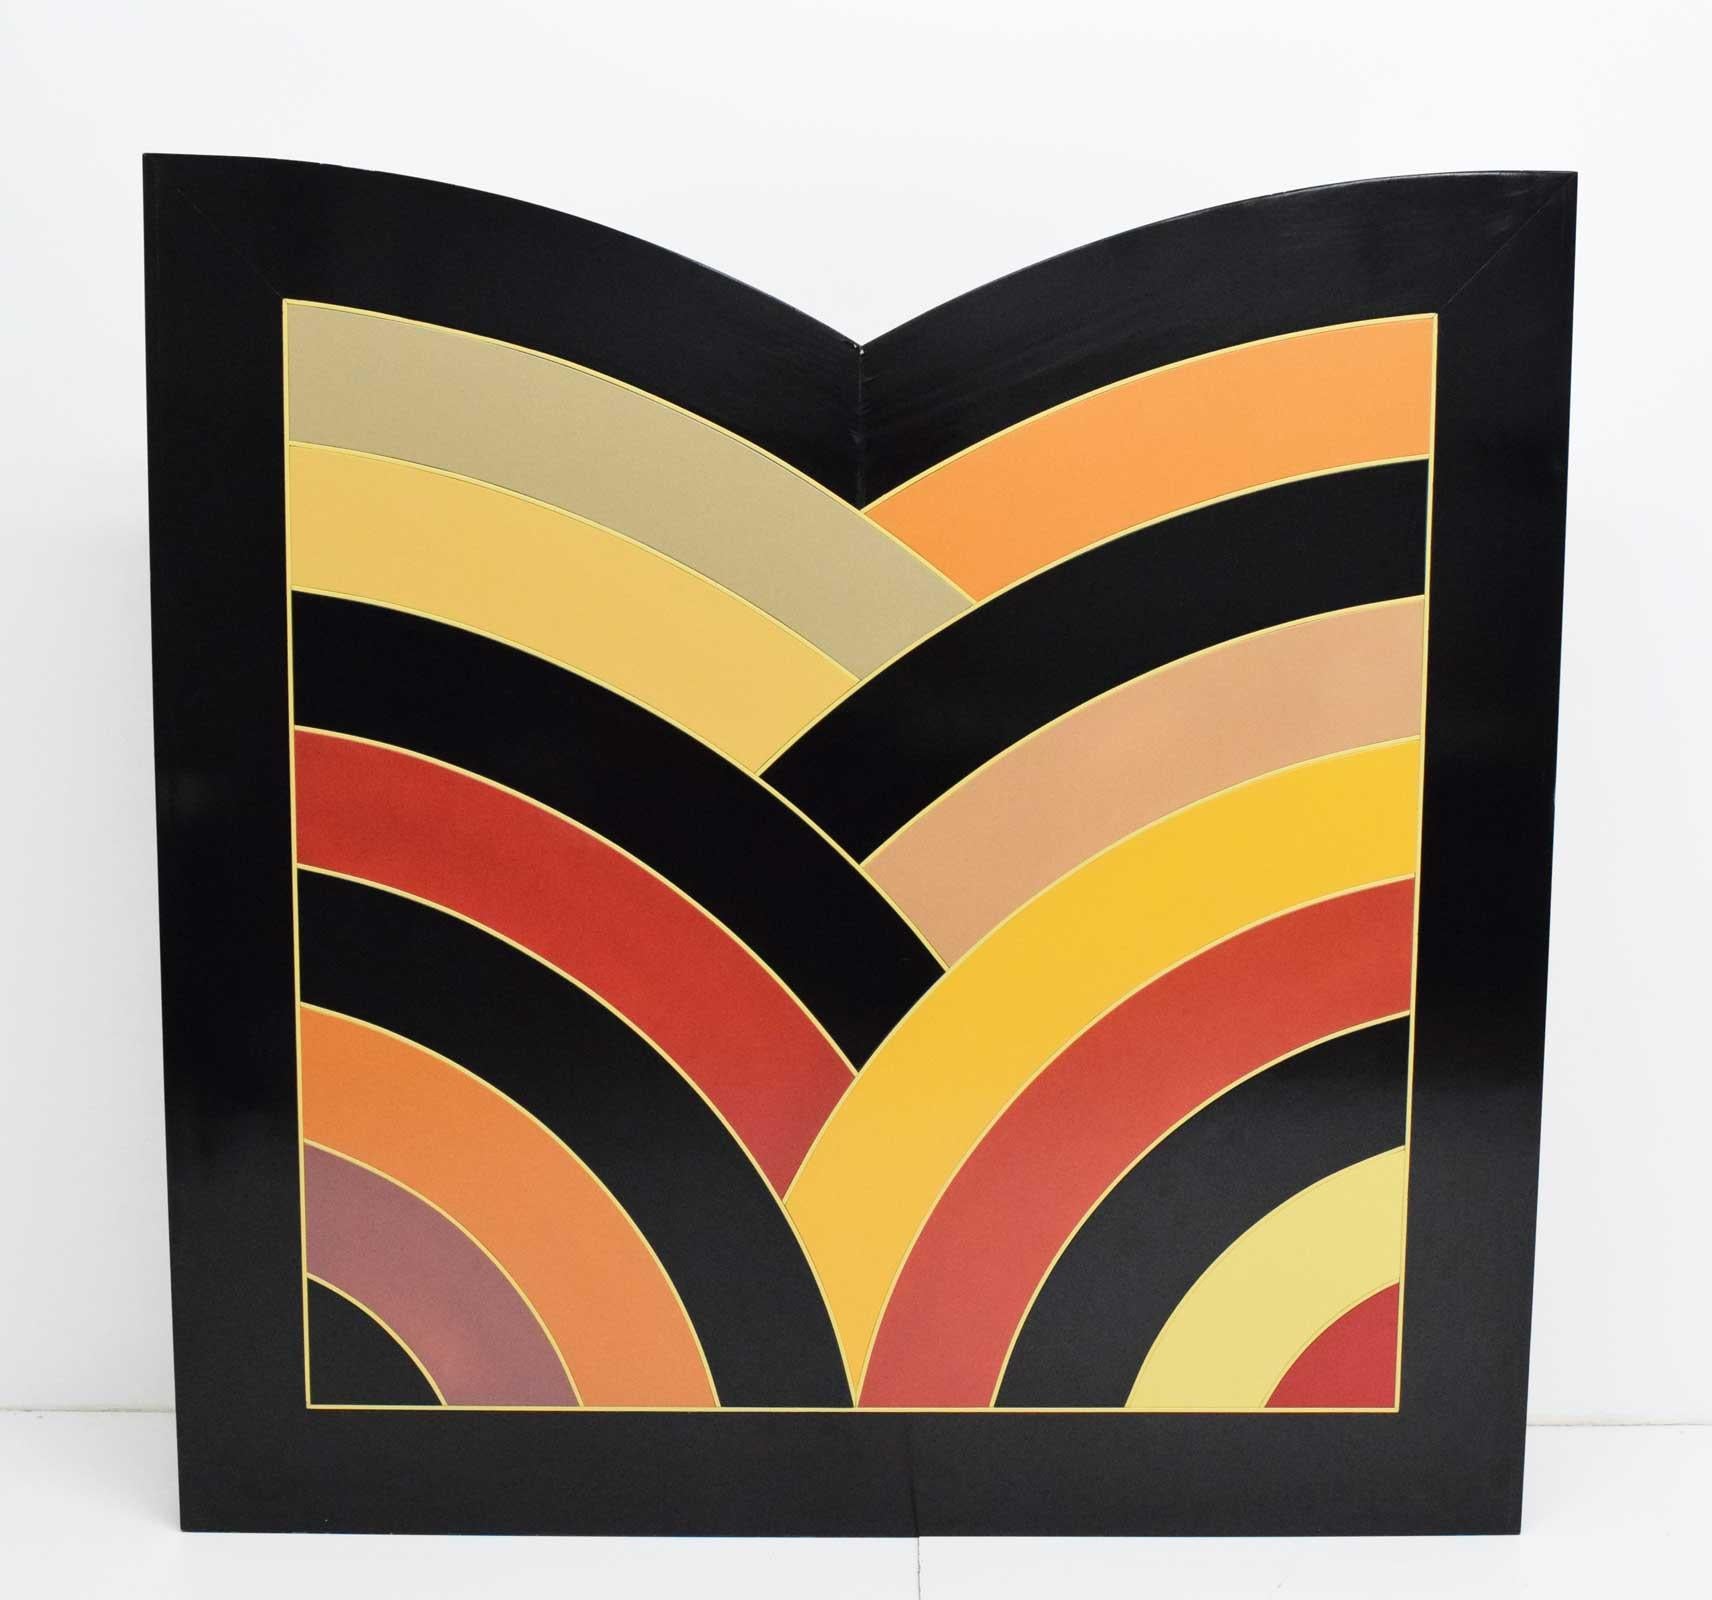 In 1969, Frank Stella was awarded the commission for the Metropolitan Museum's Centennial logo. The logo design was called the 